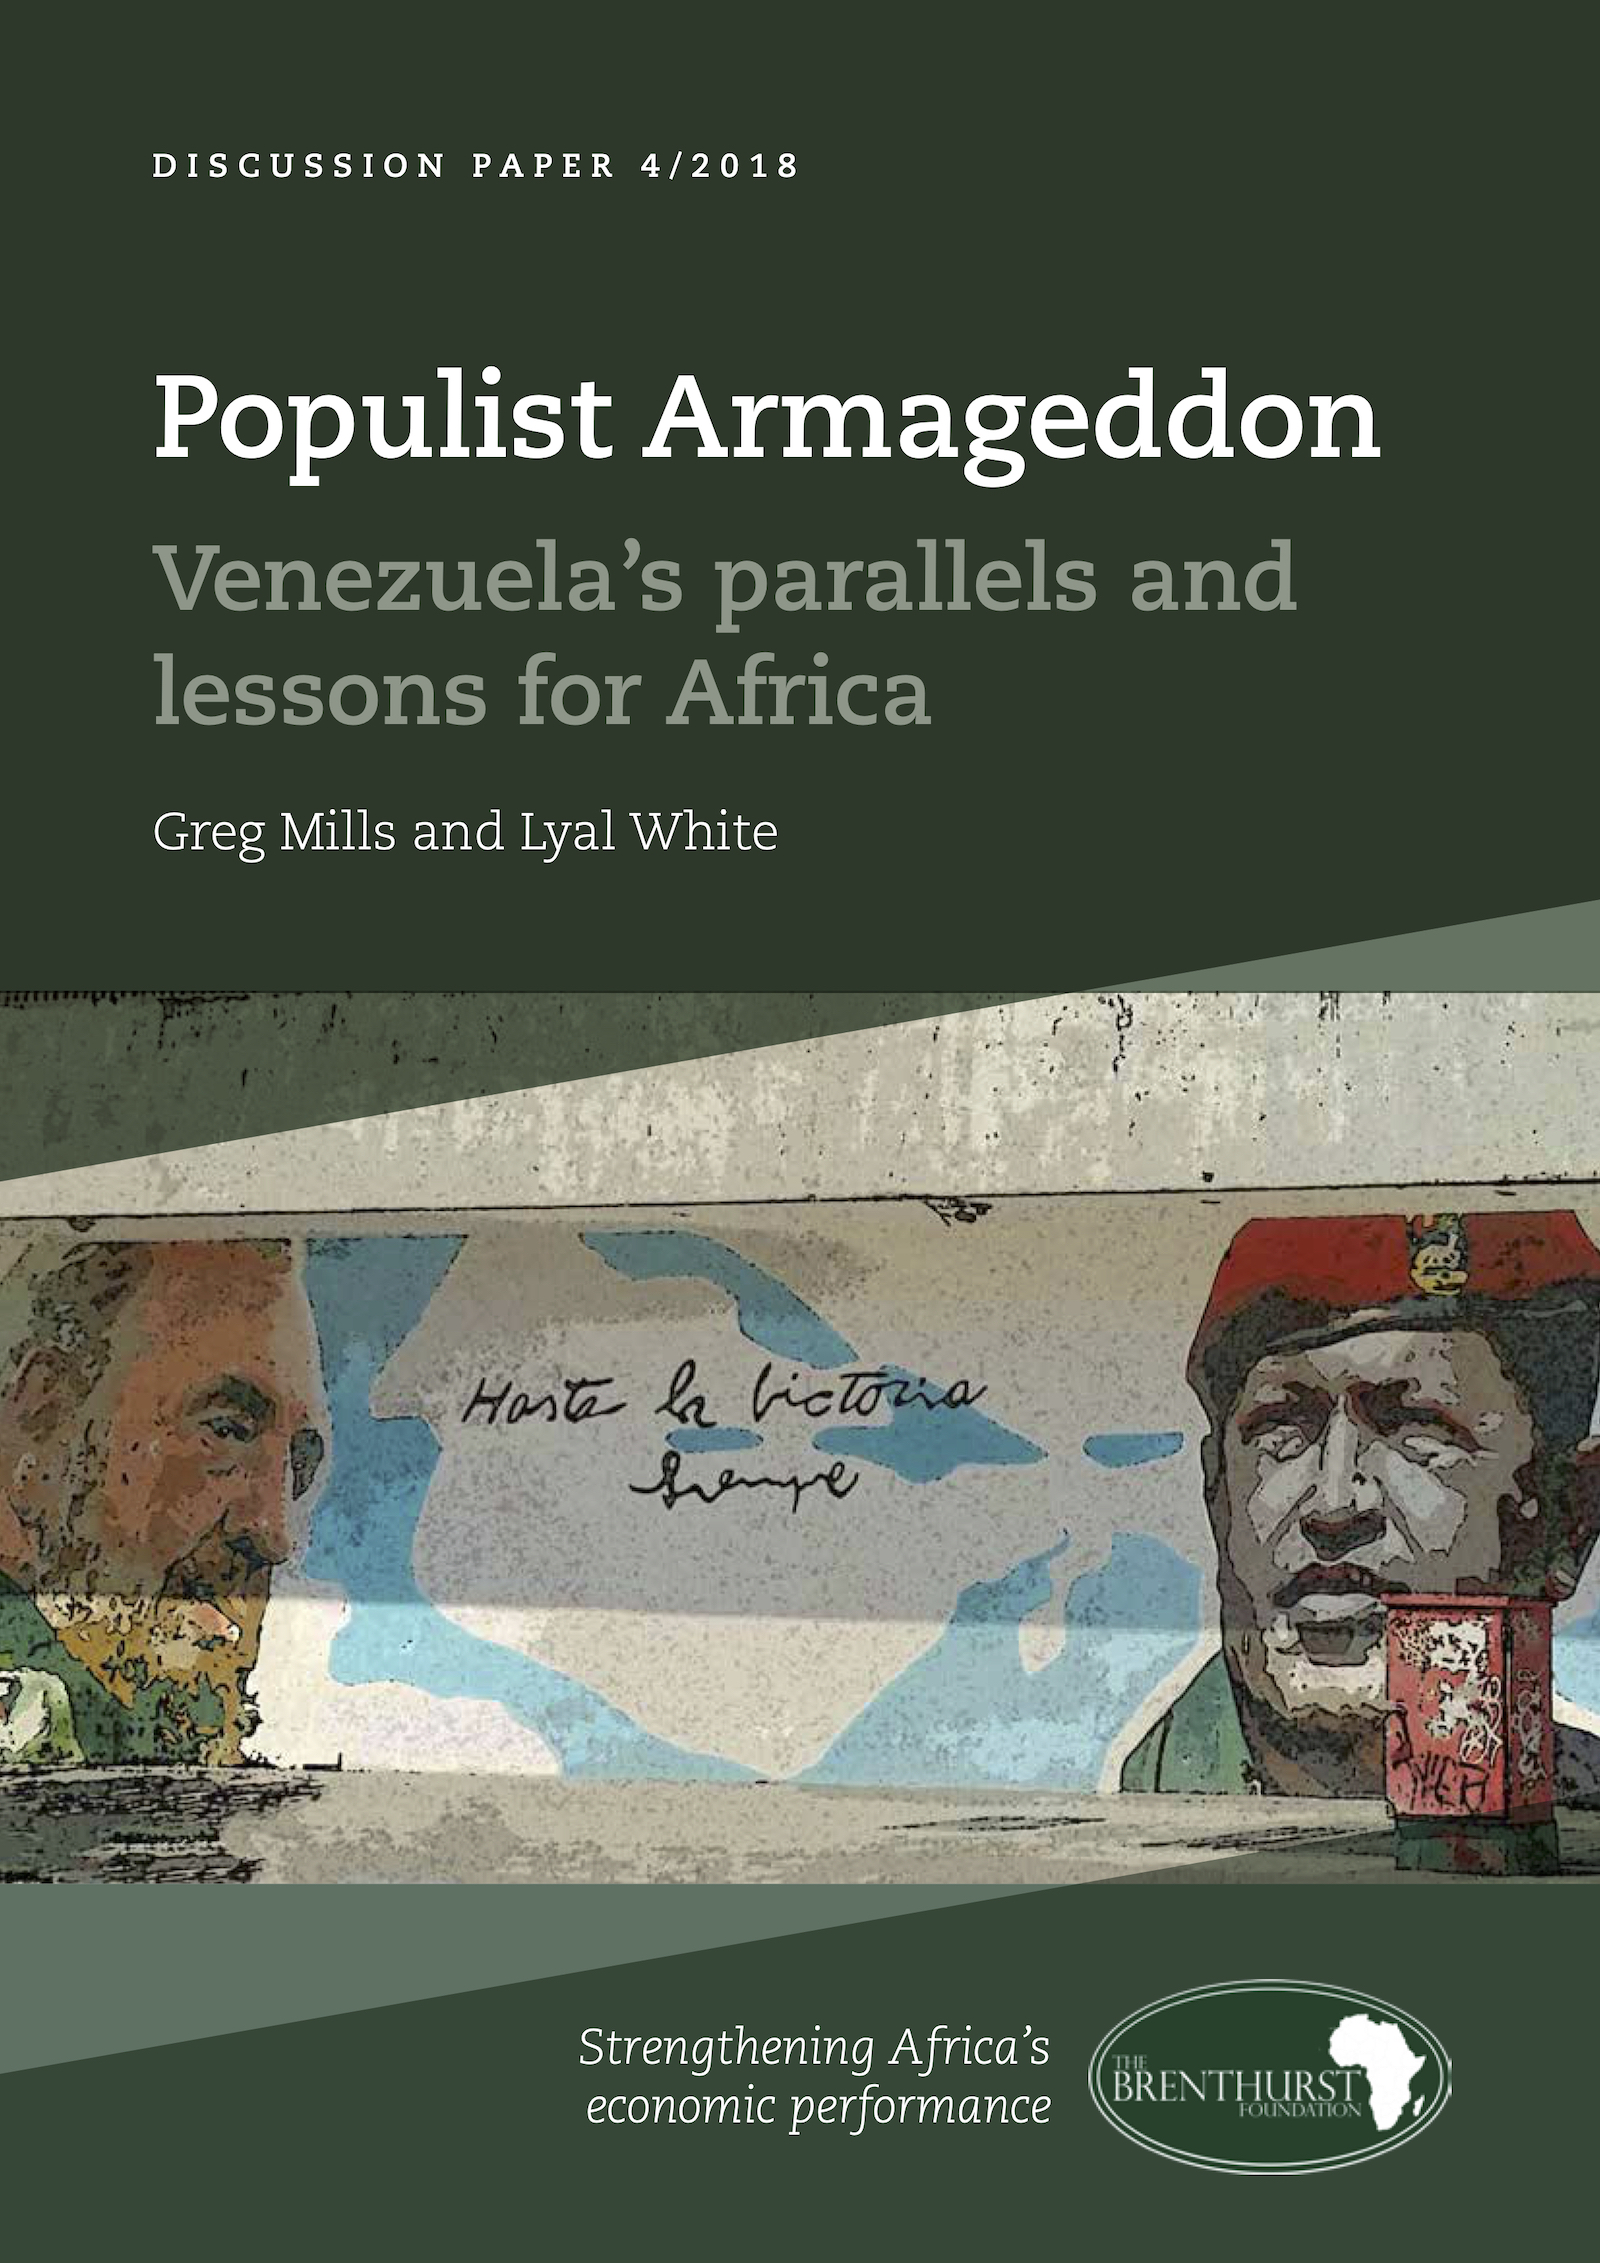 Populist Armageddon - Venezuela's parallels and lessons for Africa